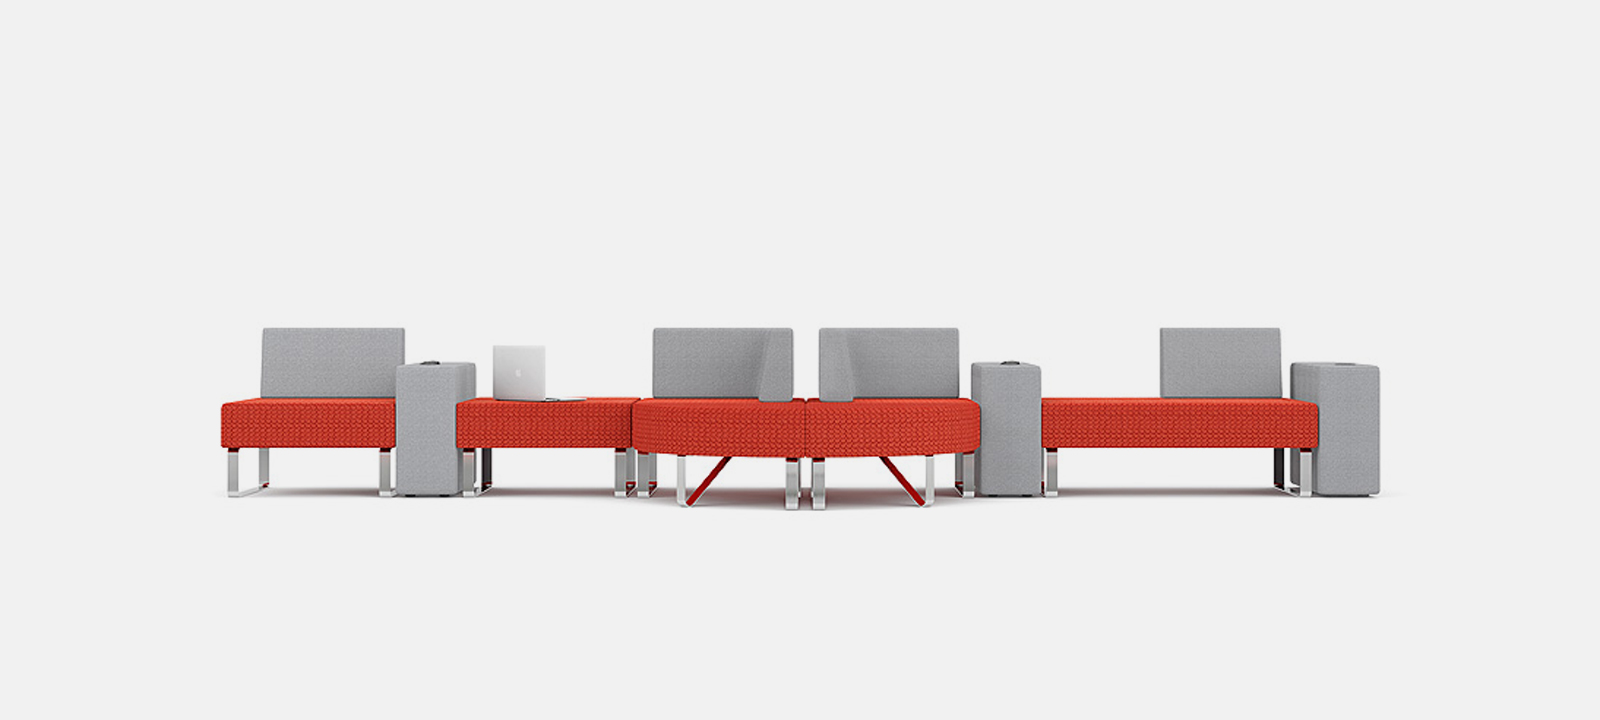 Intro modular seating in red and grey